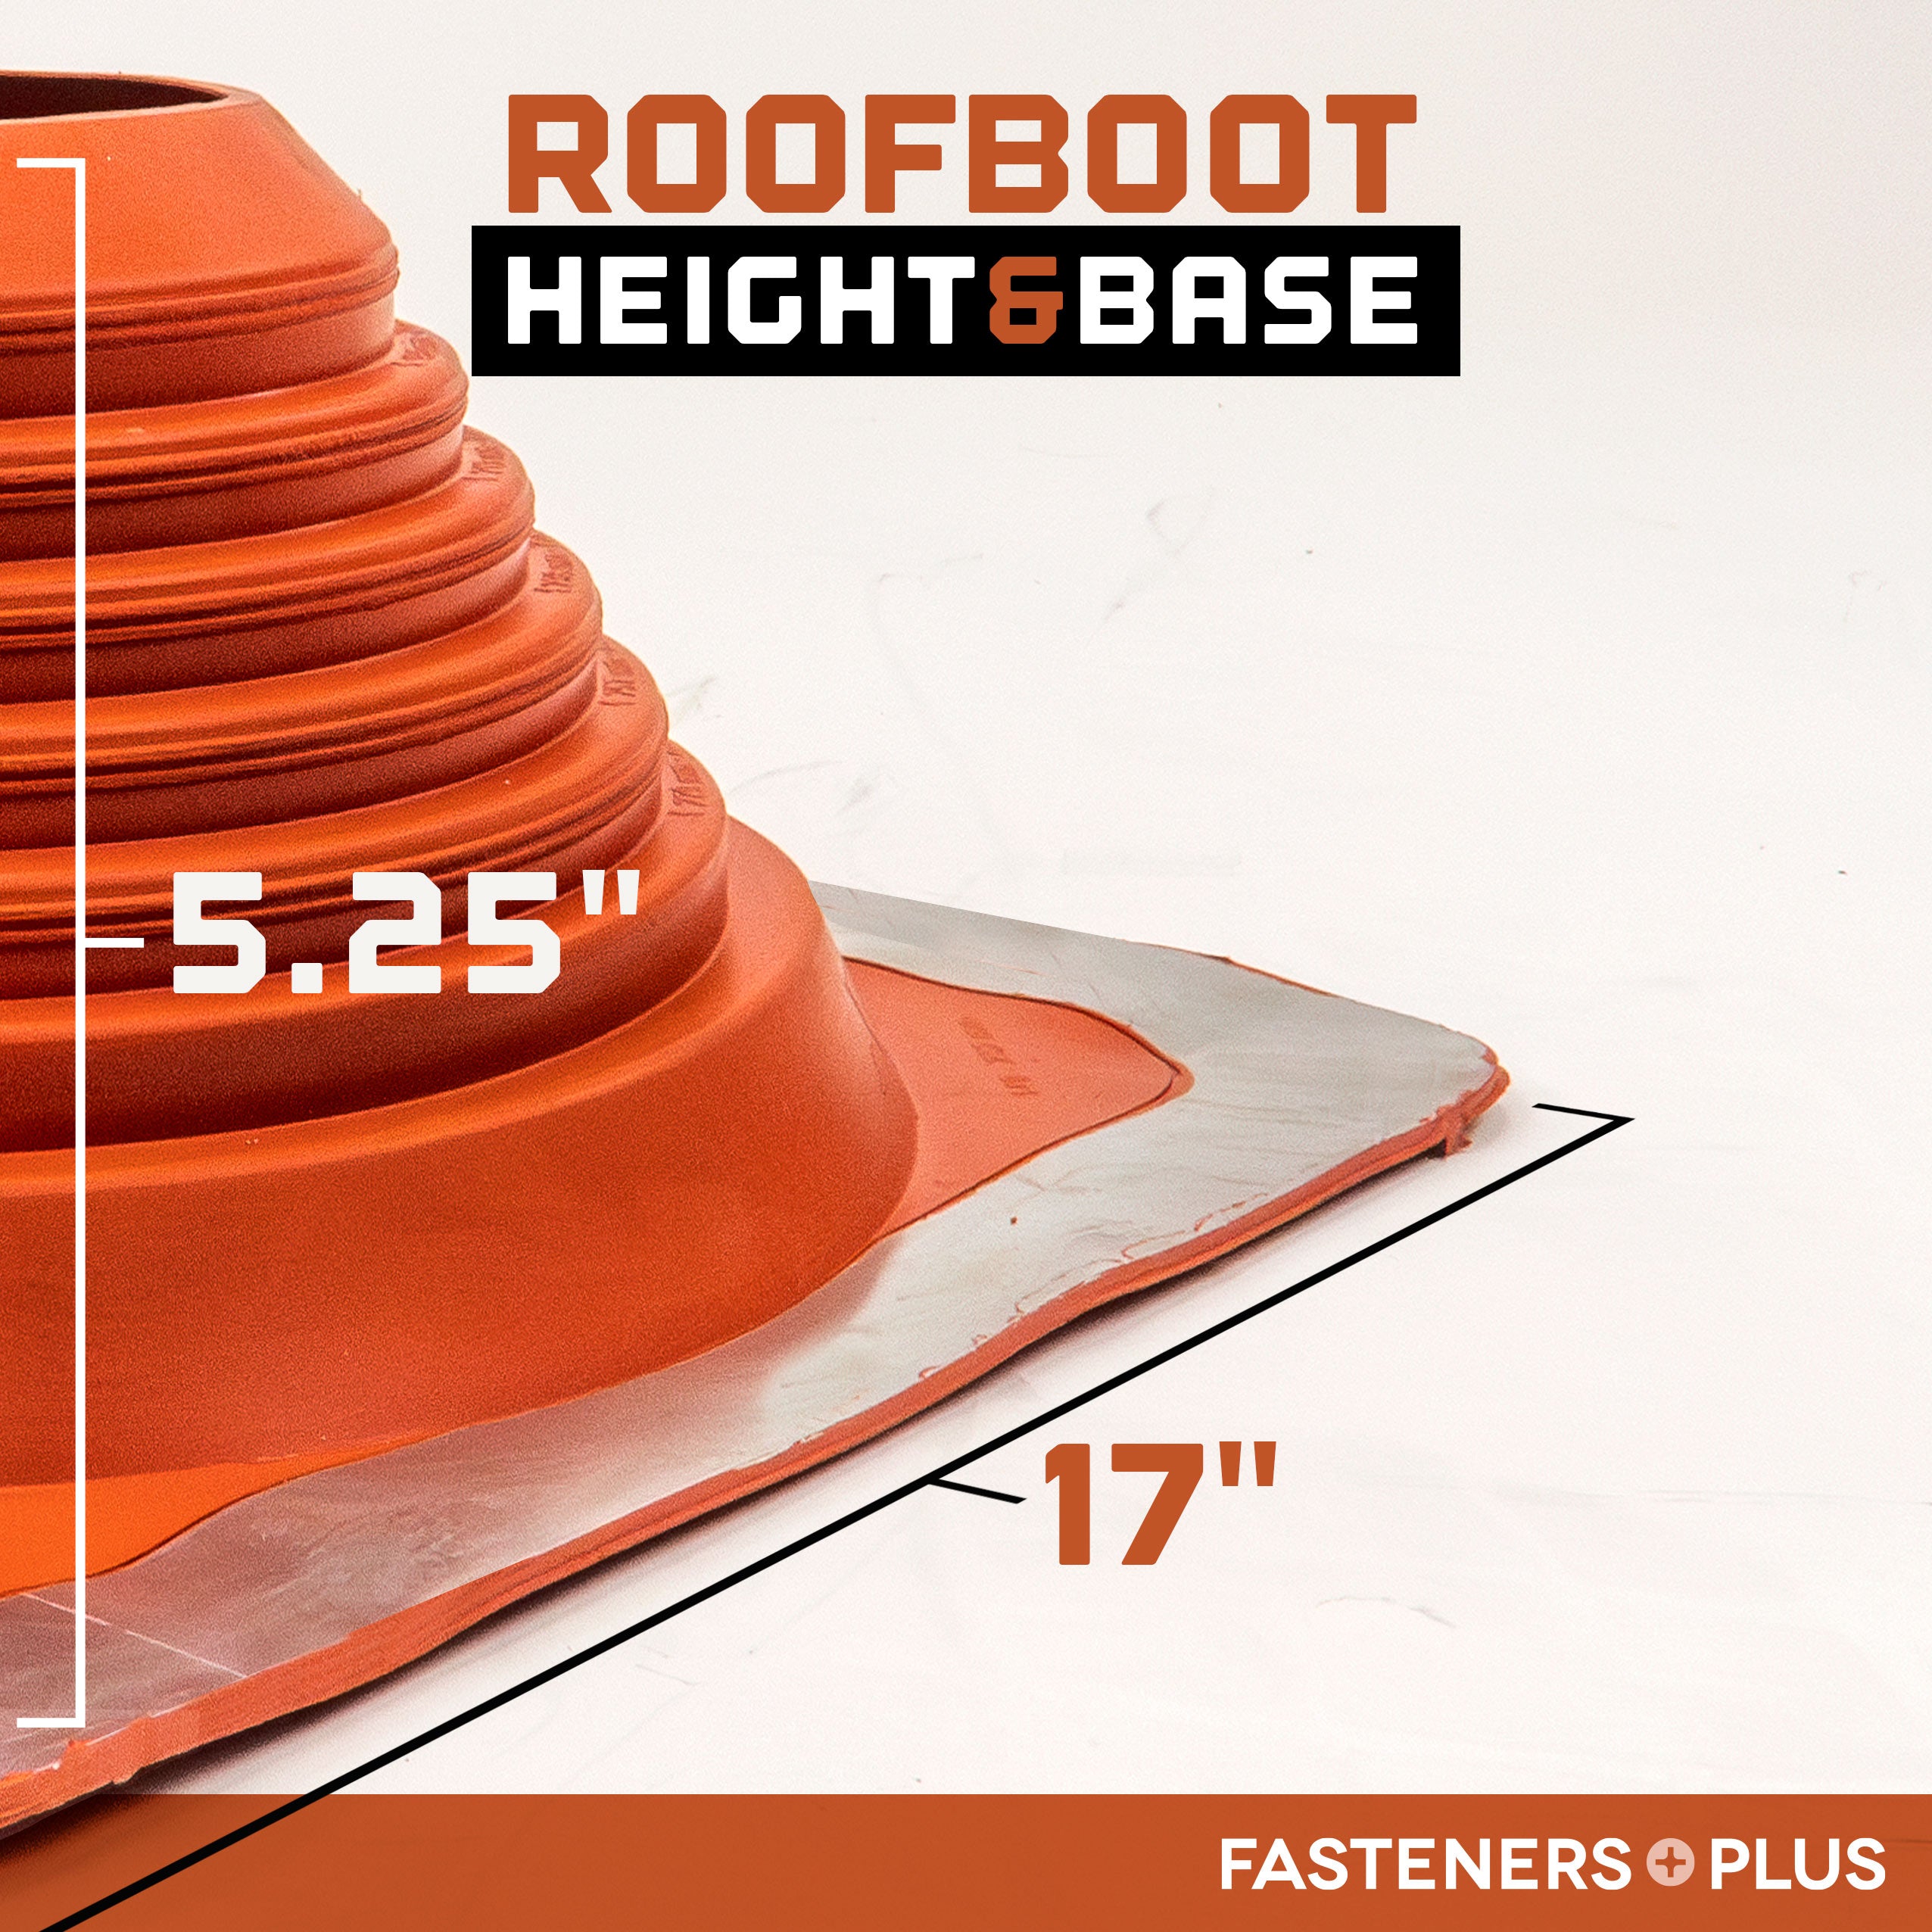 7 Square Hi-Temp Silicone Metal Roof Boot w/Install Kit, Red 